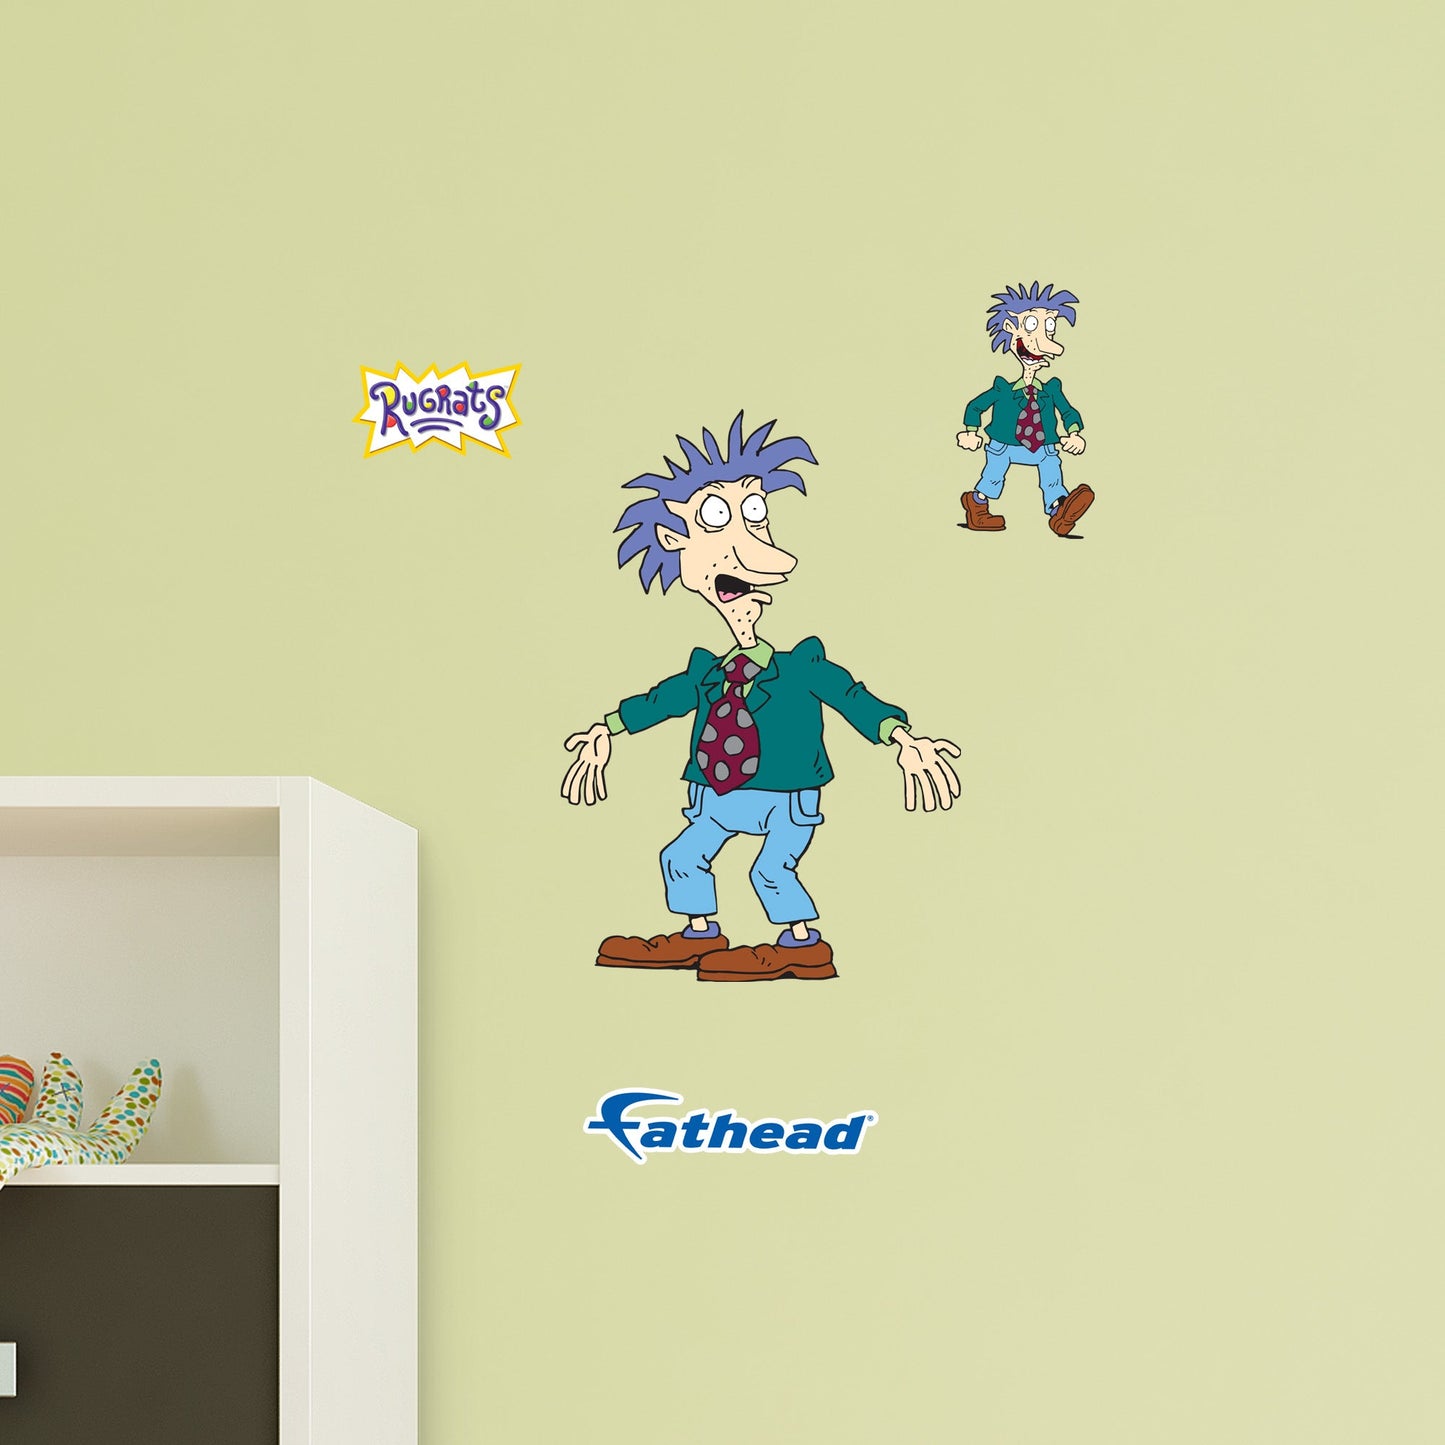 Rugrats: Stu Pickles RealBigs - Officially Licensed Nickelodeon Removable Adhesive Decal